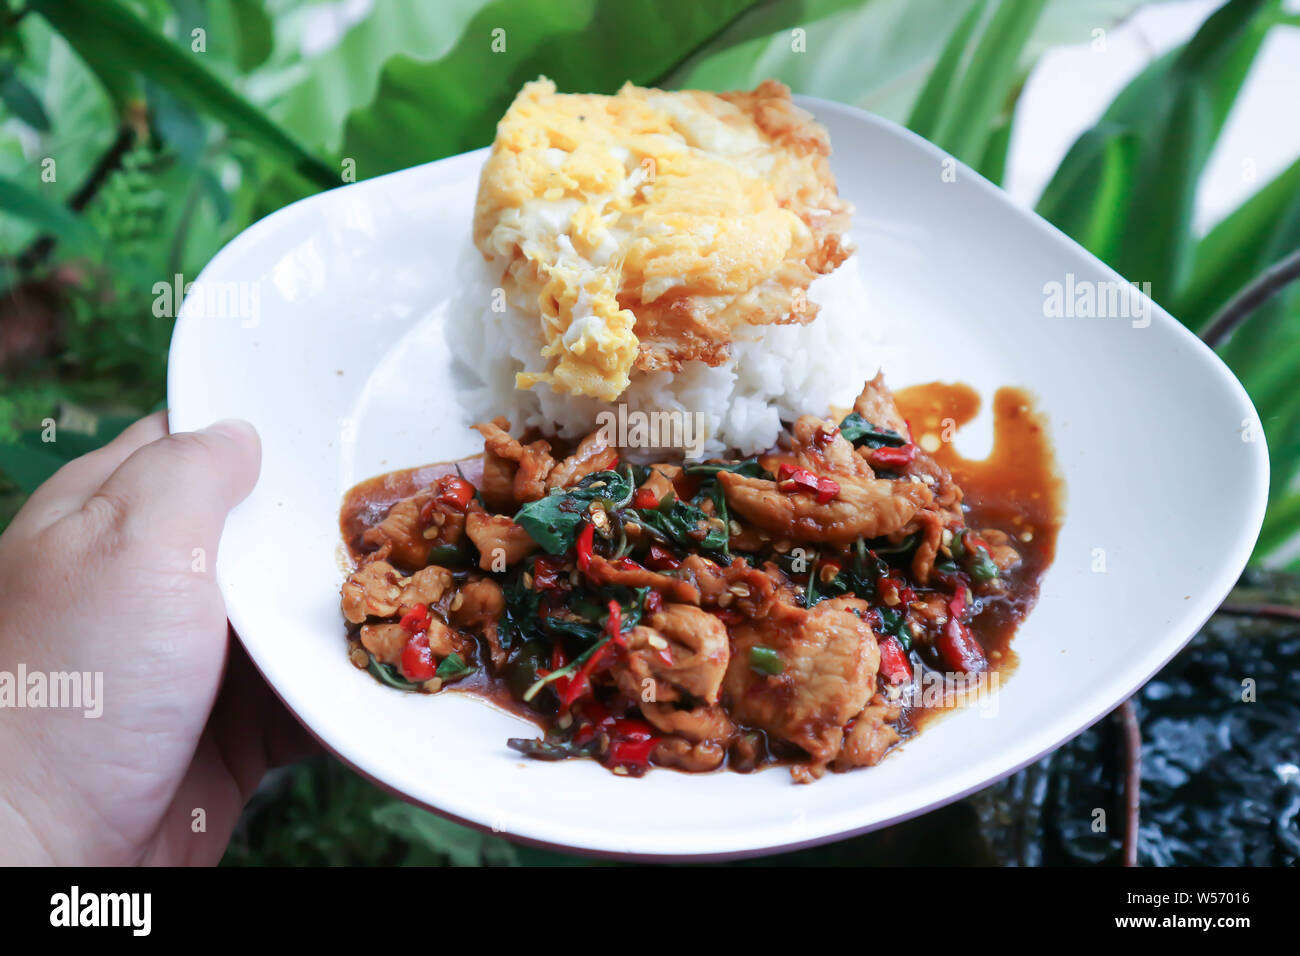 stir-fried pork with fried egg, holy basil and rice dish Stock Photo